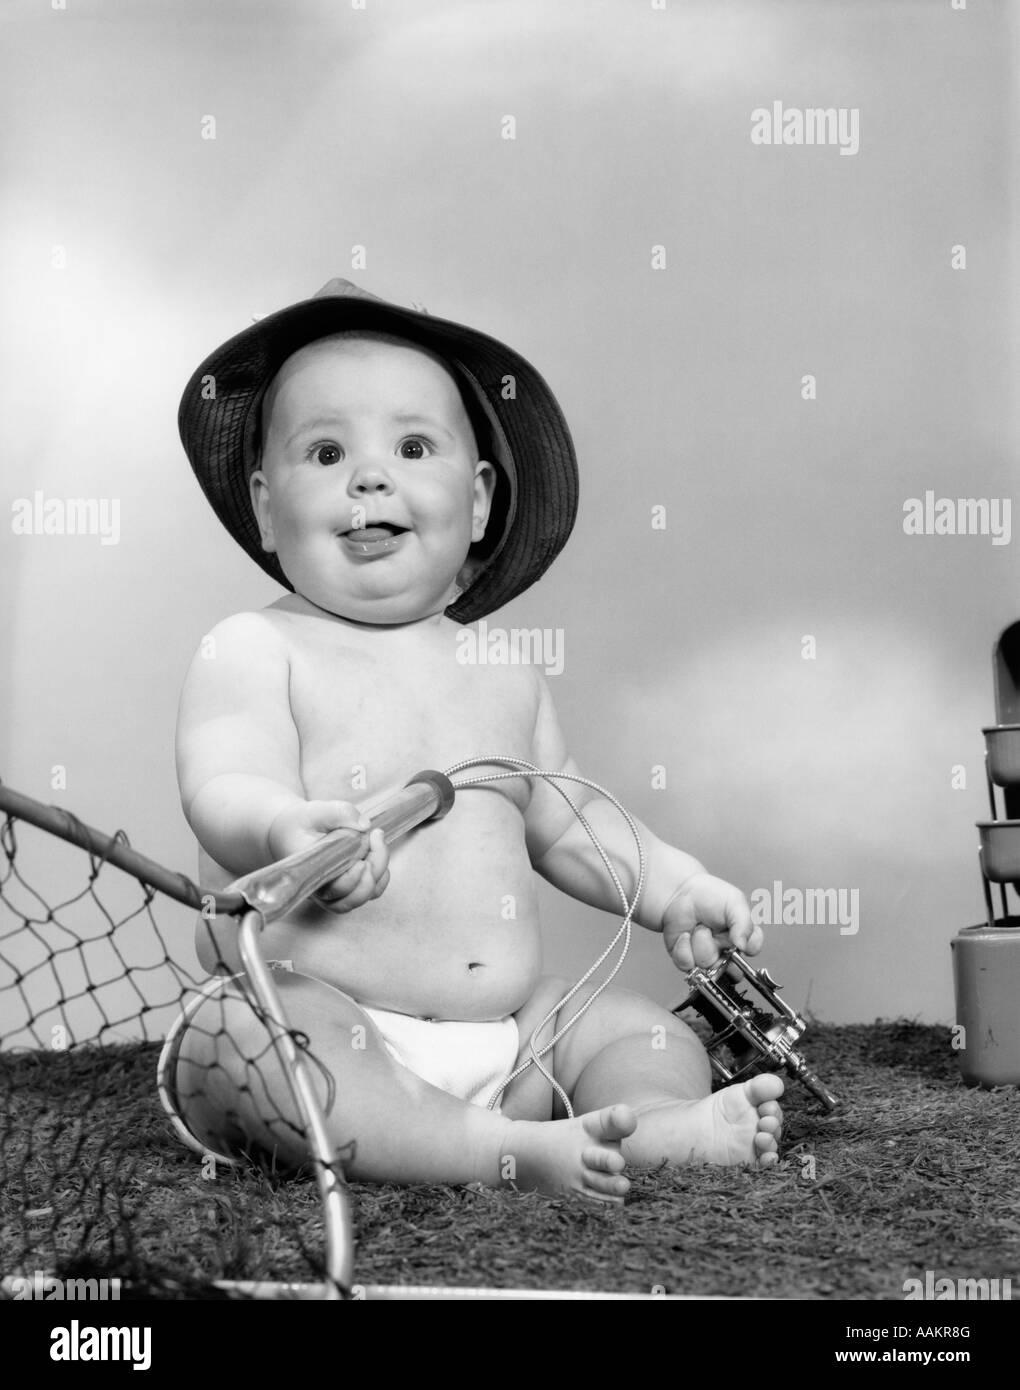 1960s BABY GIRL WEARING FISHING HAT HOLDING NET AND REEL FISHING GEAR  INDOOR Stock Photo - Alamy